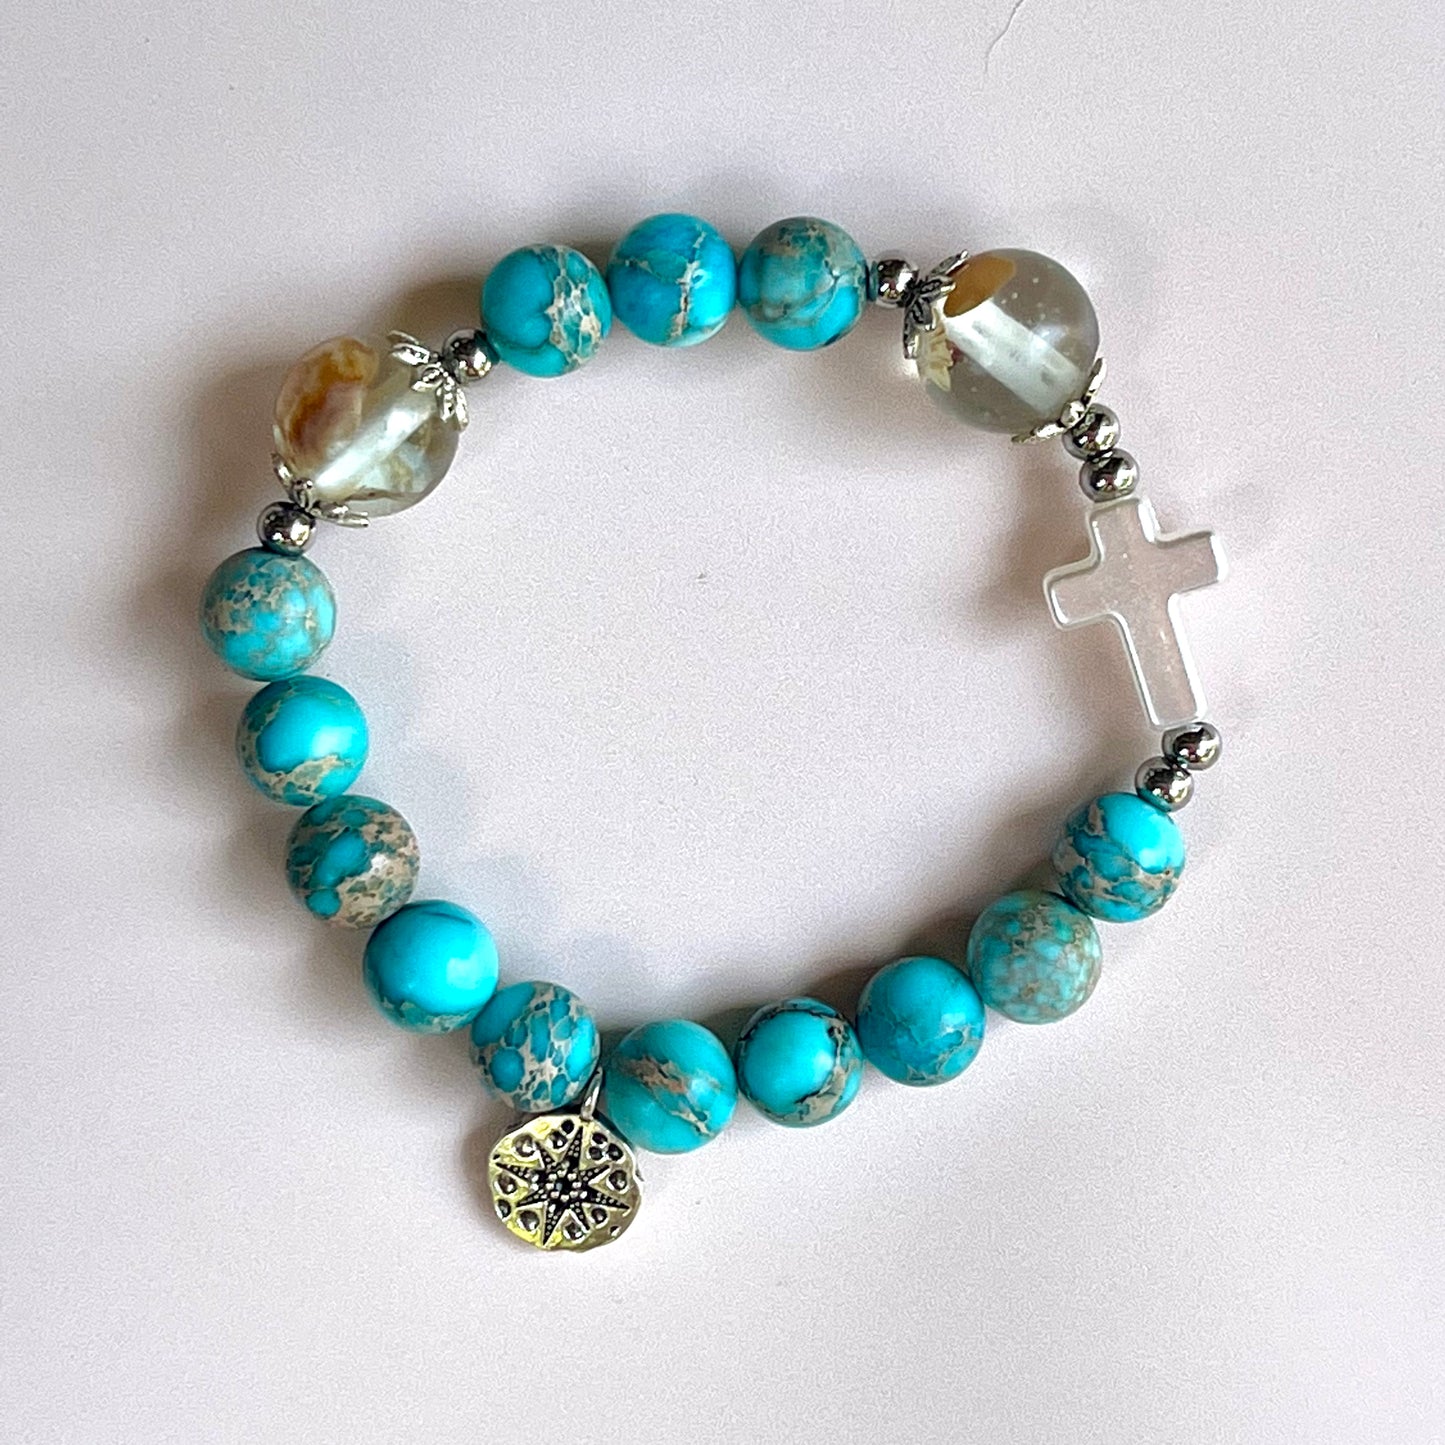 Rosary Bracelet inspired by Our Lady Star of the Sea (blue) - Australian Flower Series